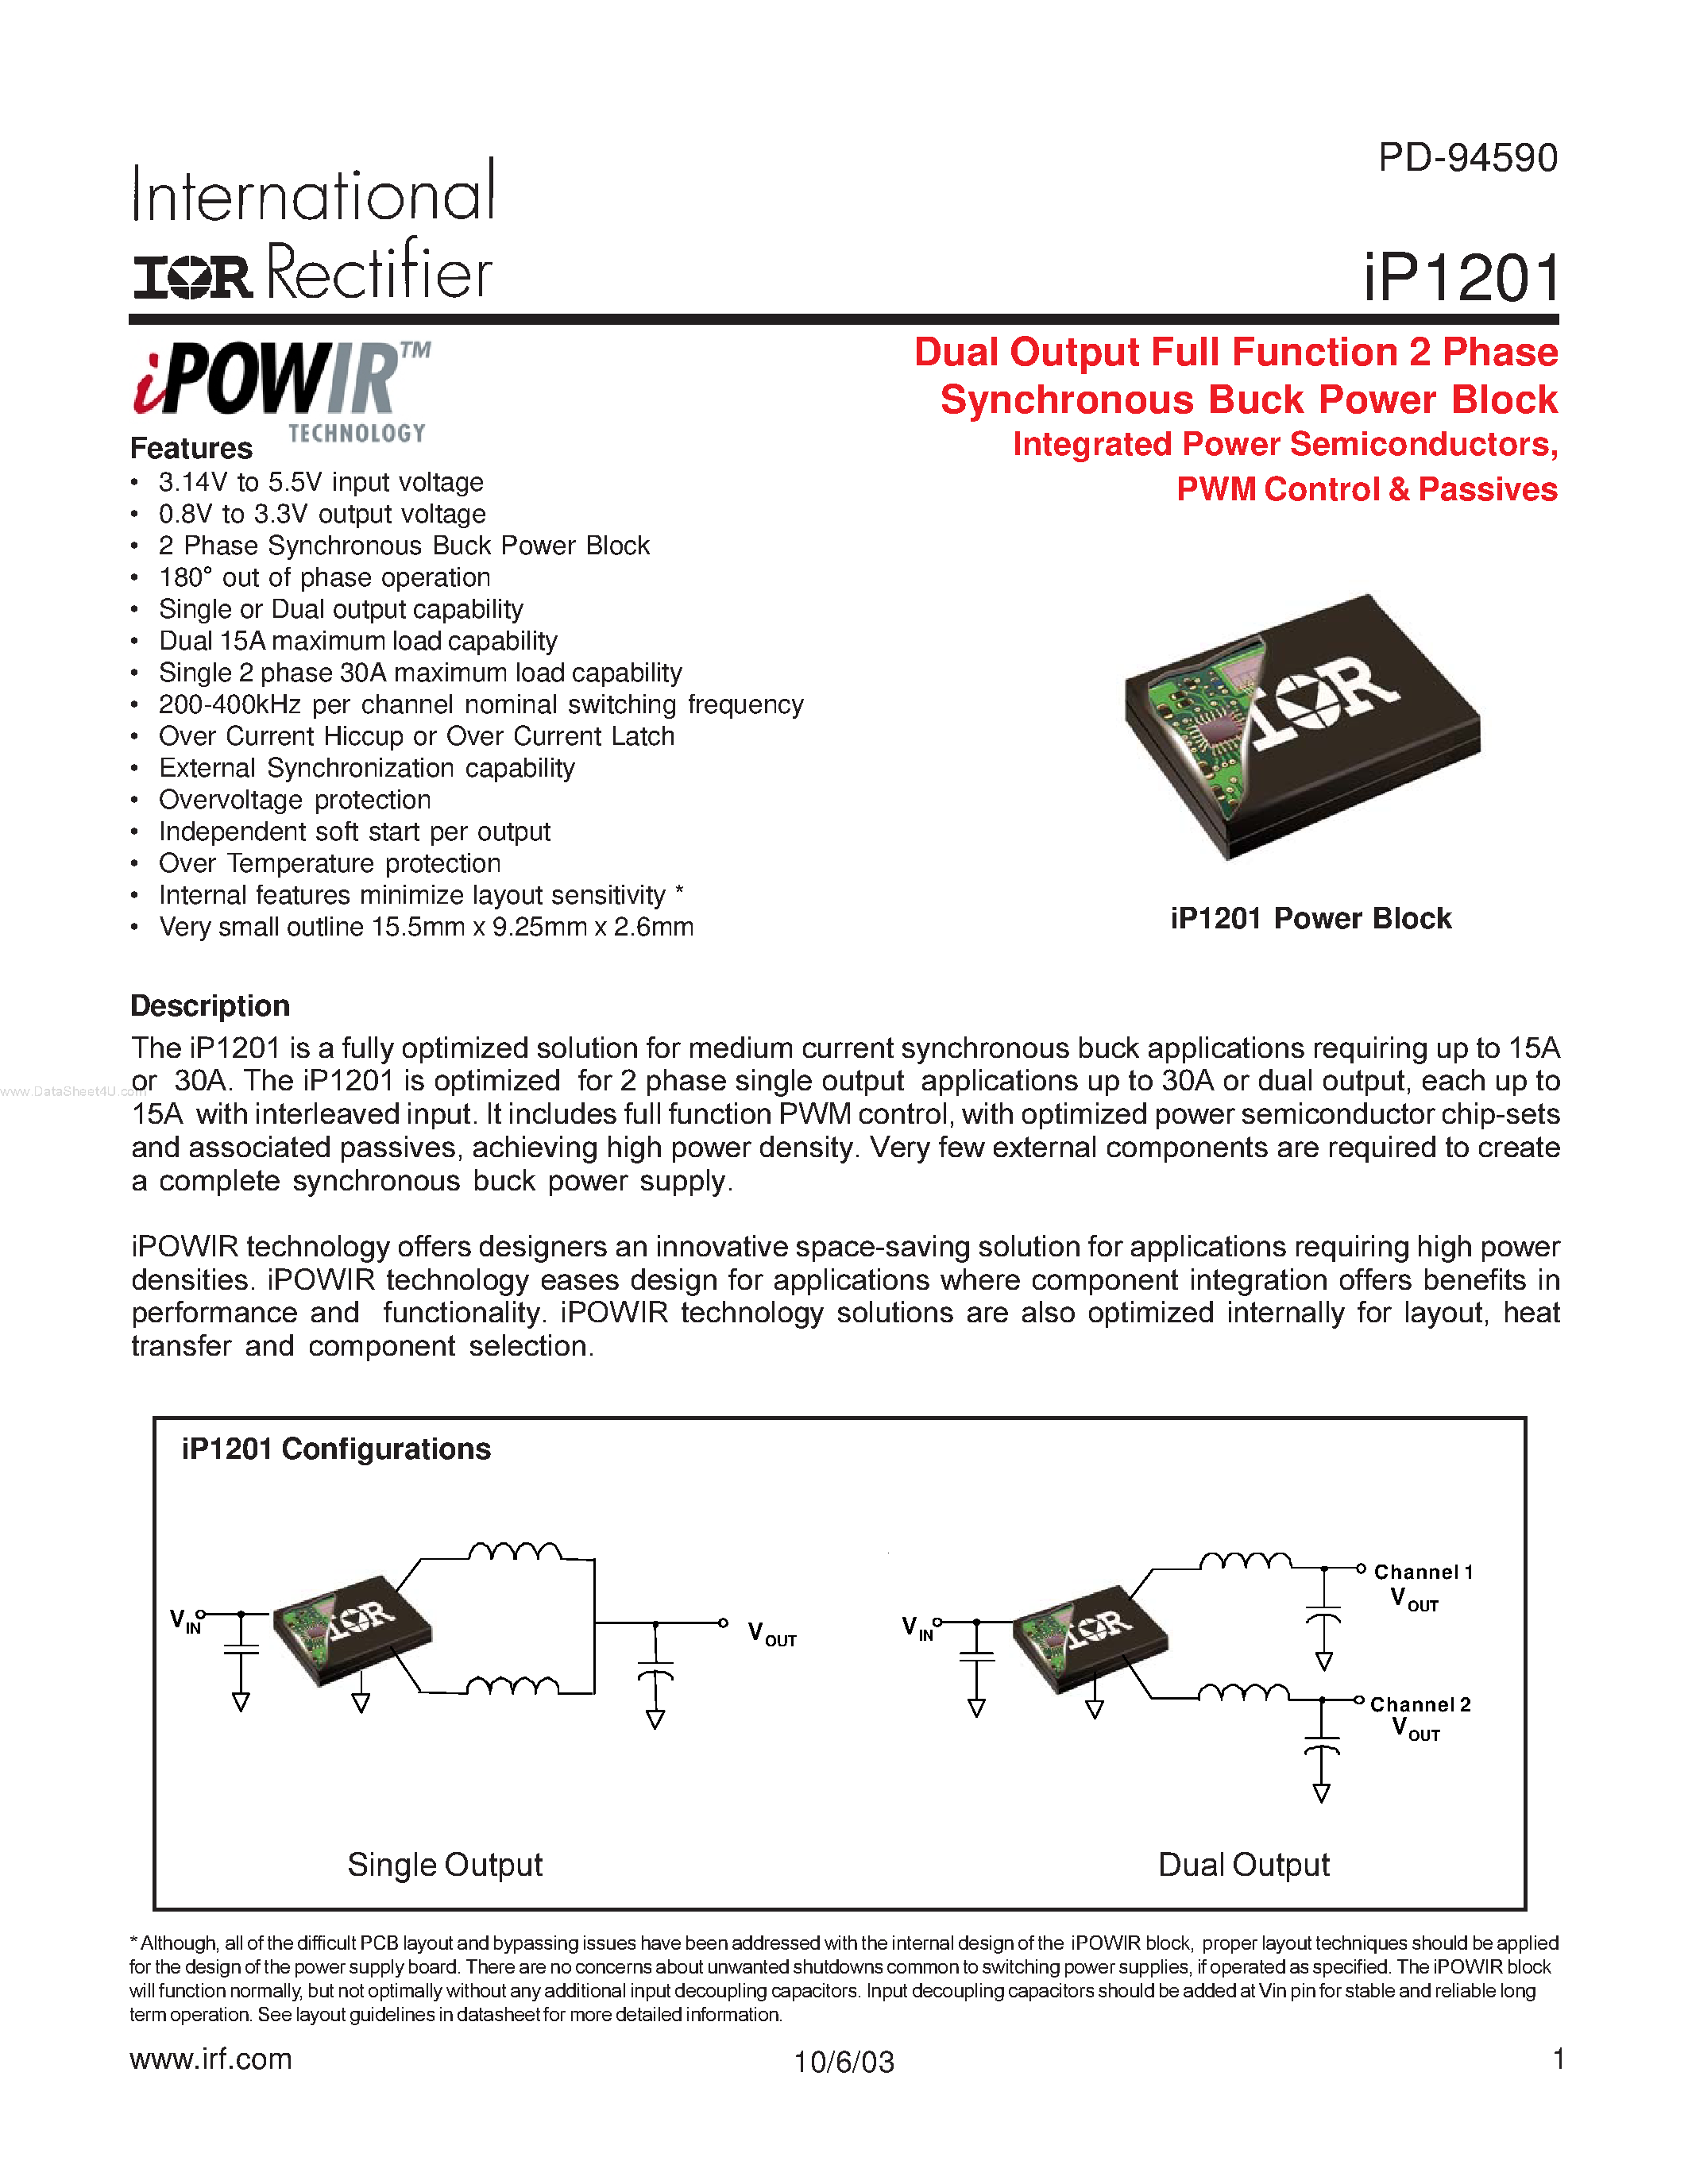 Datasheet IP1201 - Dual Output Full Function 2 Phase Synchronous Buck Power Block Integrated Power Semiconductors page 1